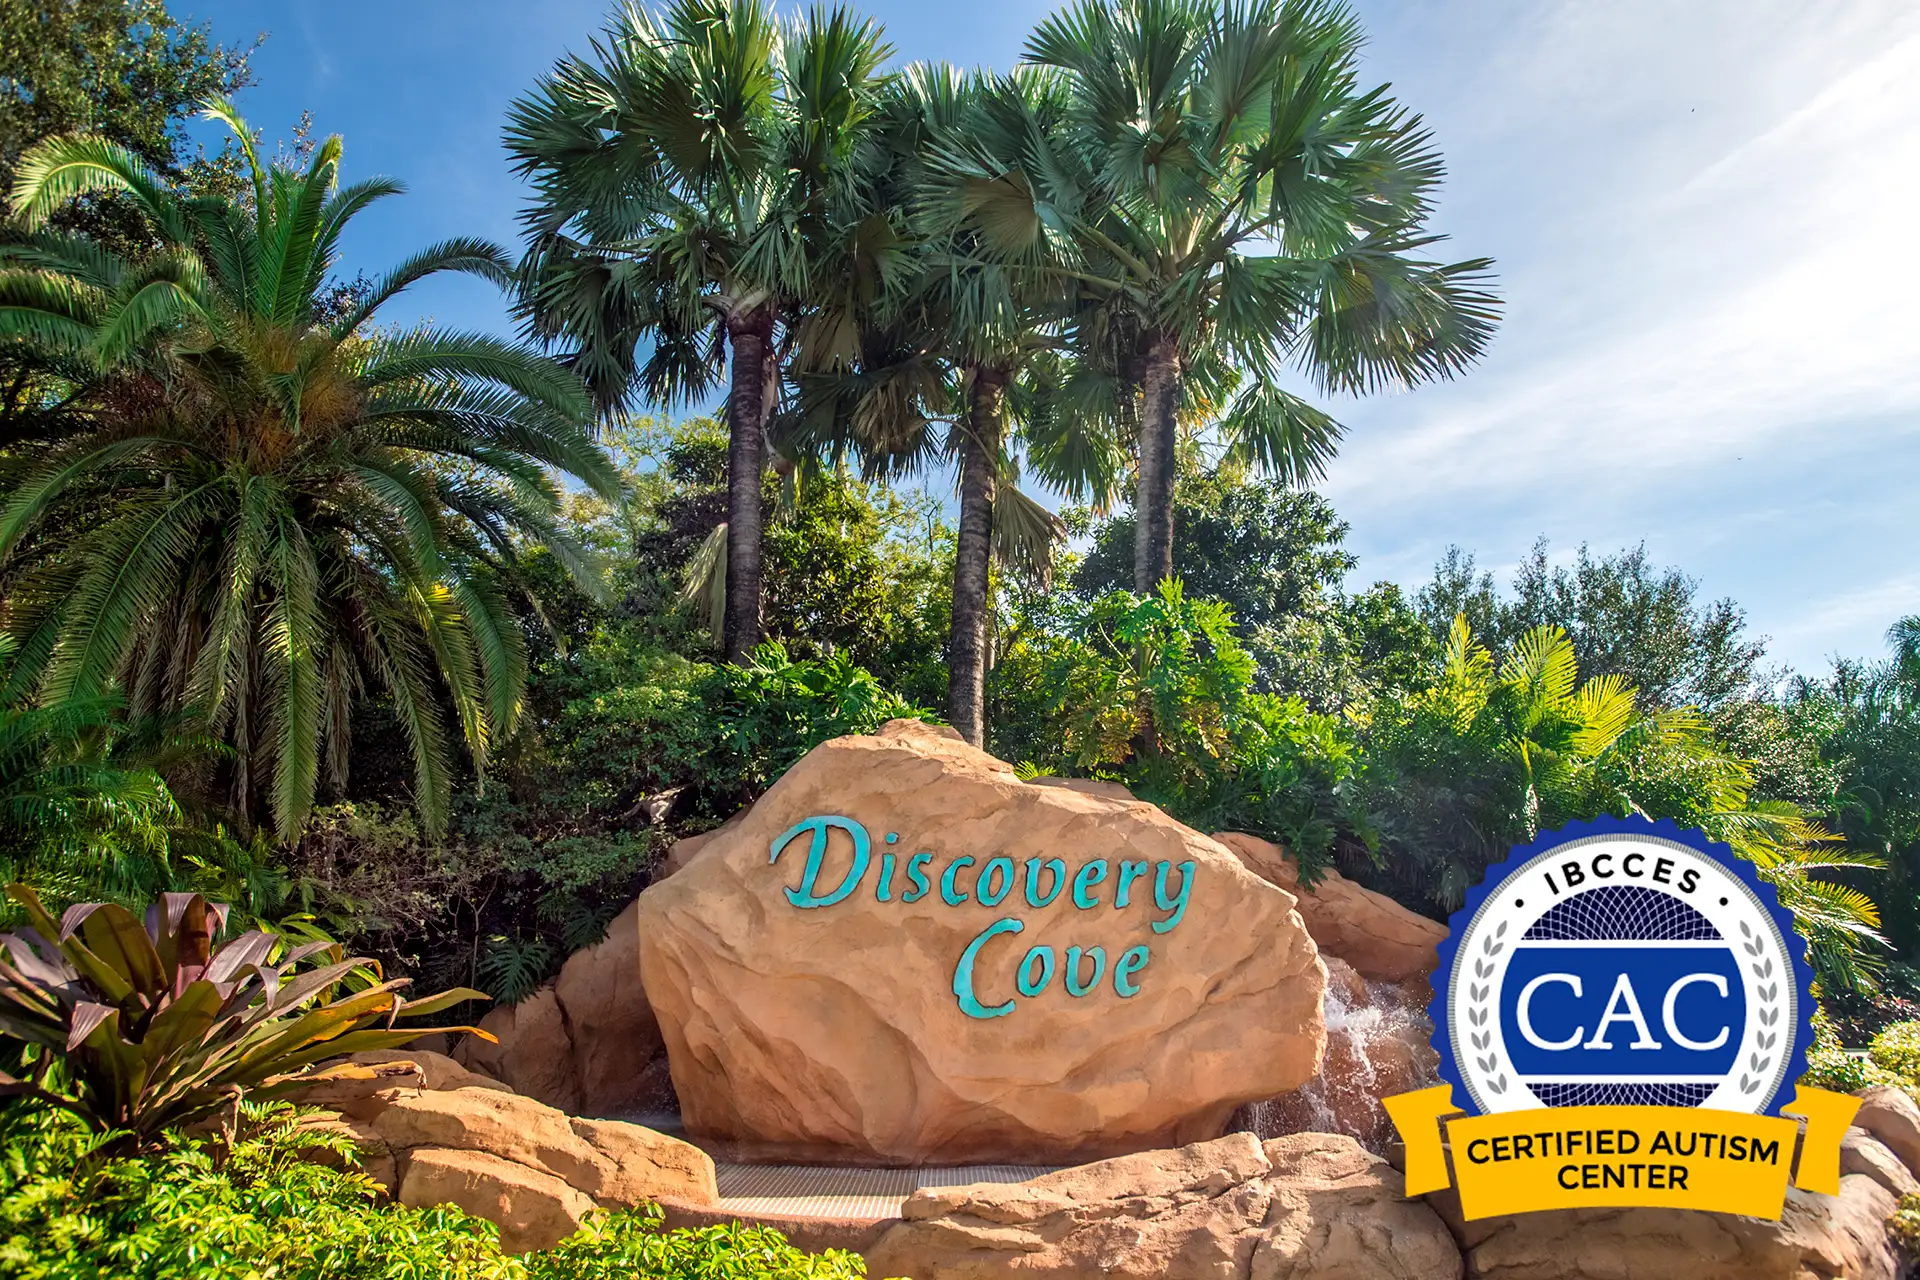 Discovery Cove in Orlando - Certified Autism Center; Courtesy of Discovery Cove